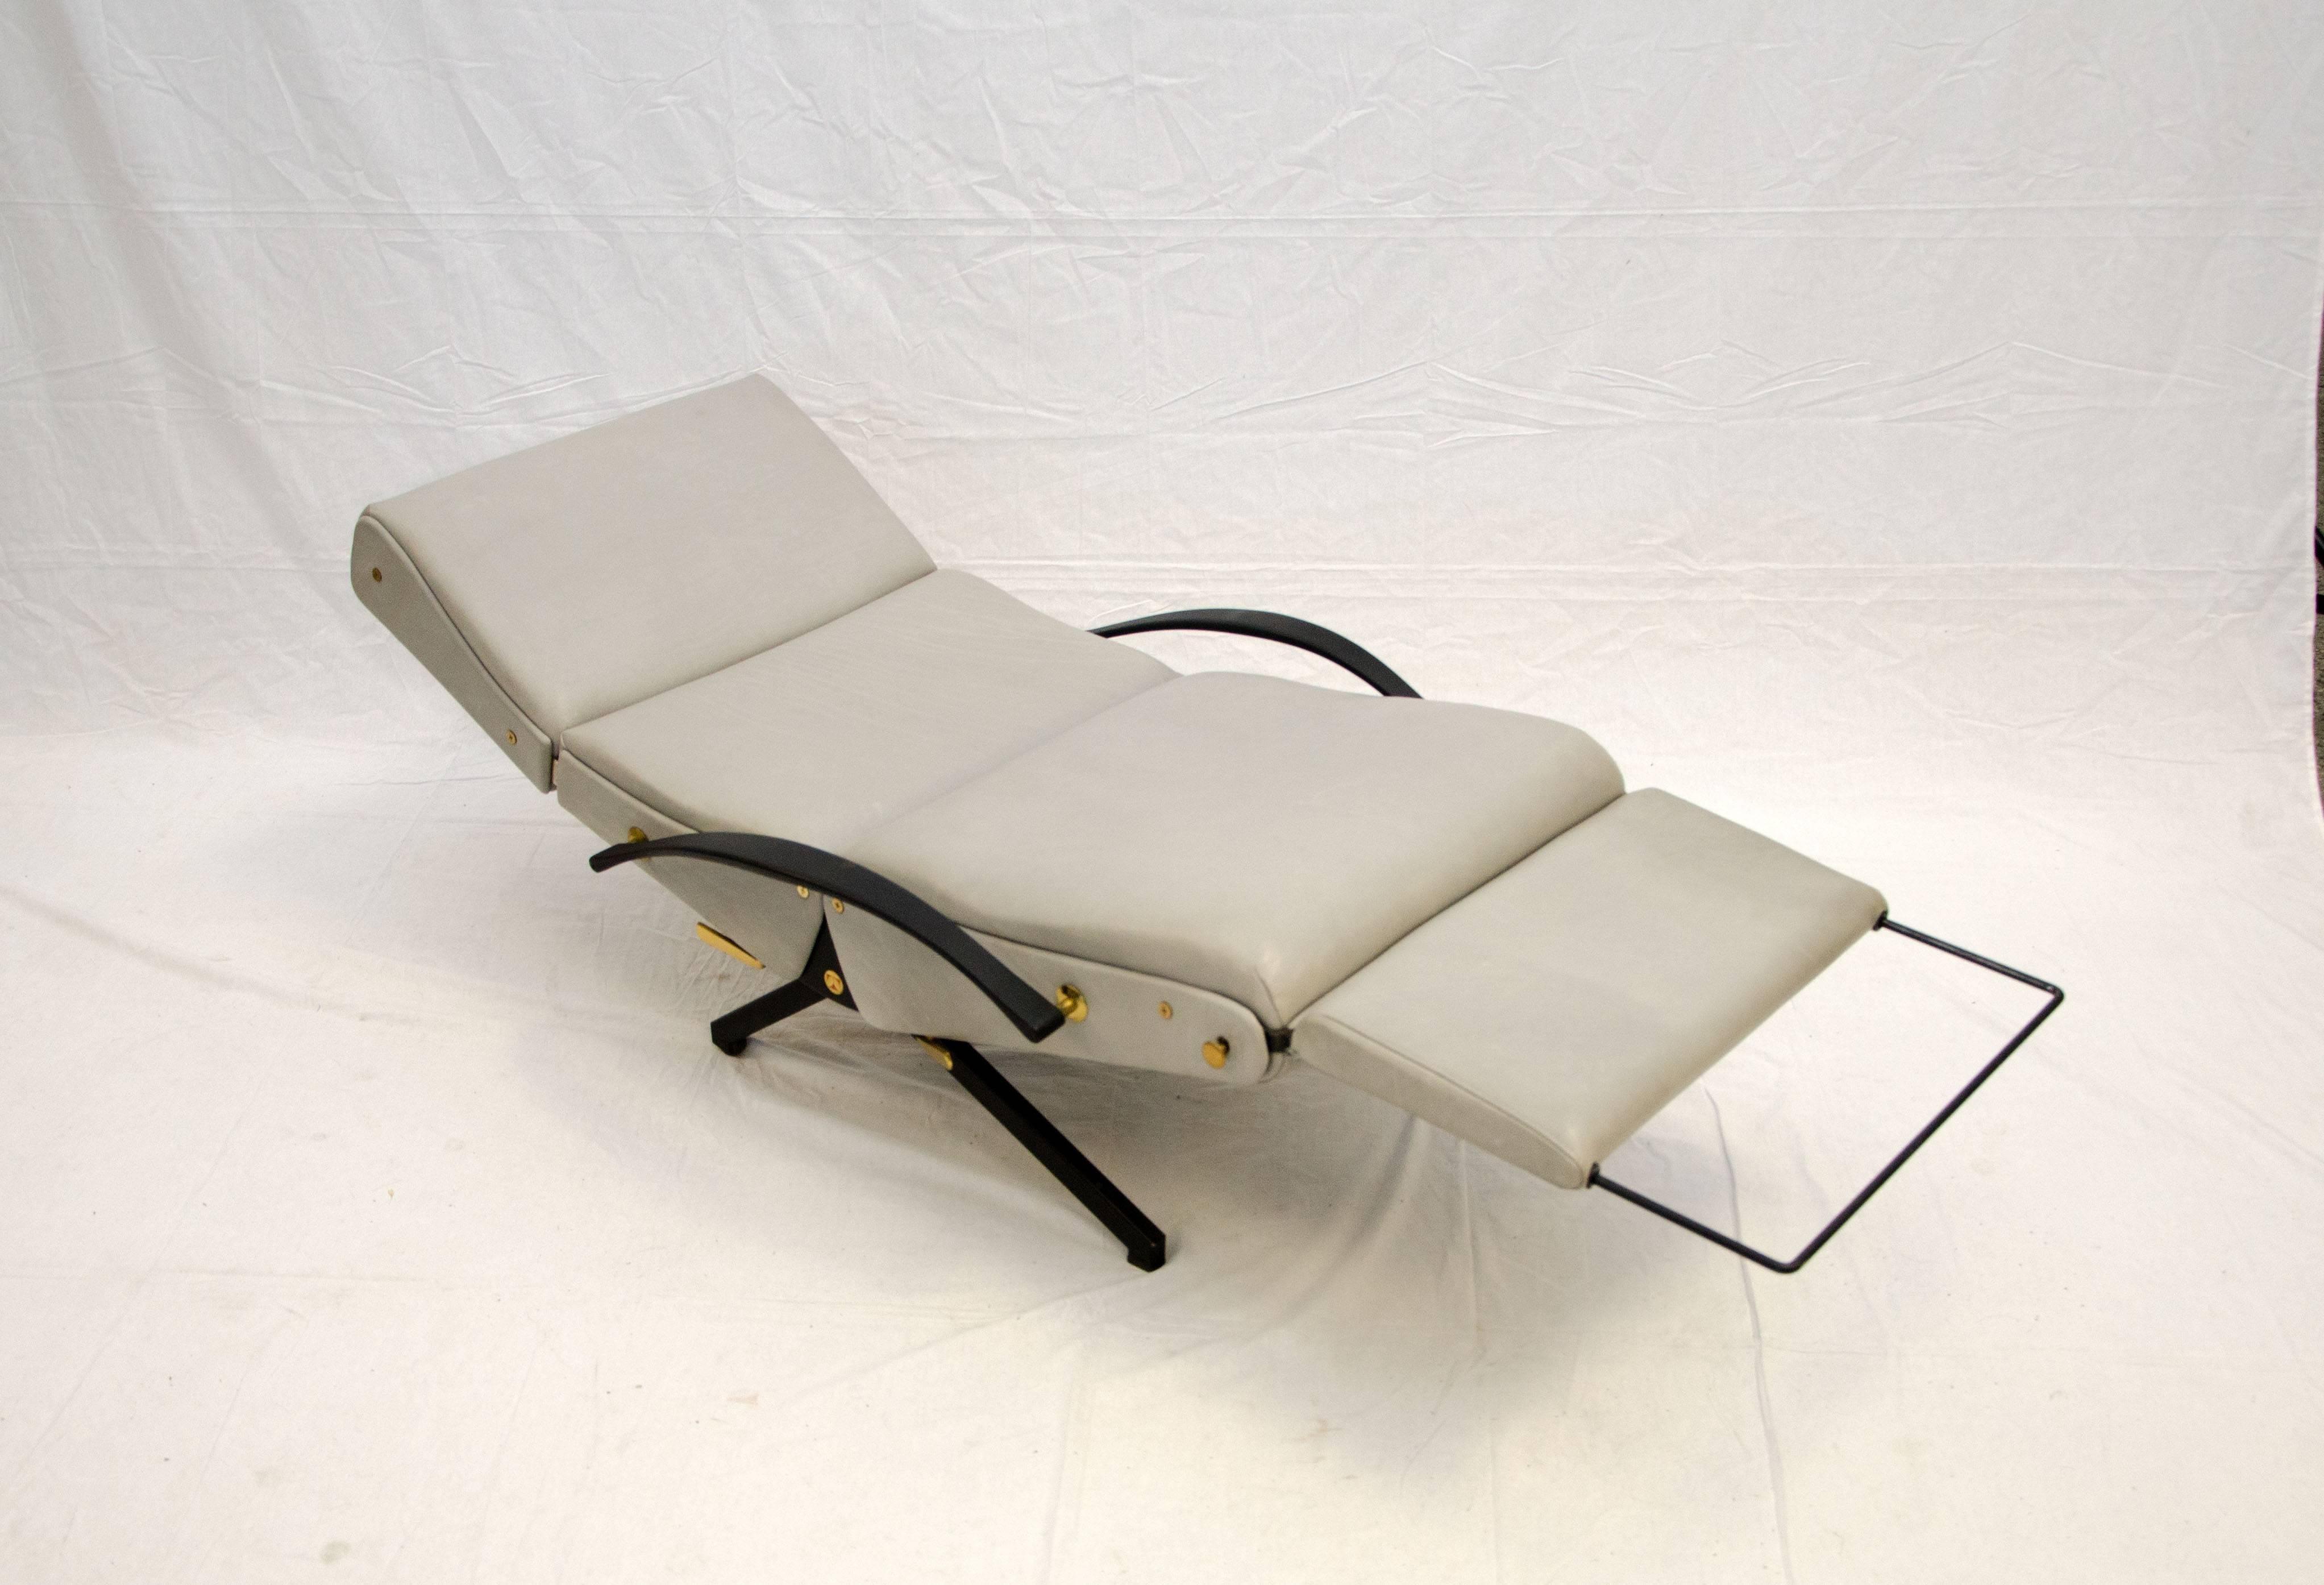 Adjustable P40 Lounge Chair by Osvaldo Borsani for Tecno In Excellent Condition For Sale In Crockett, CA